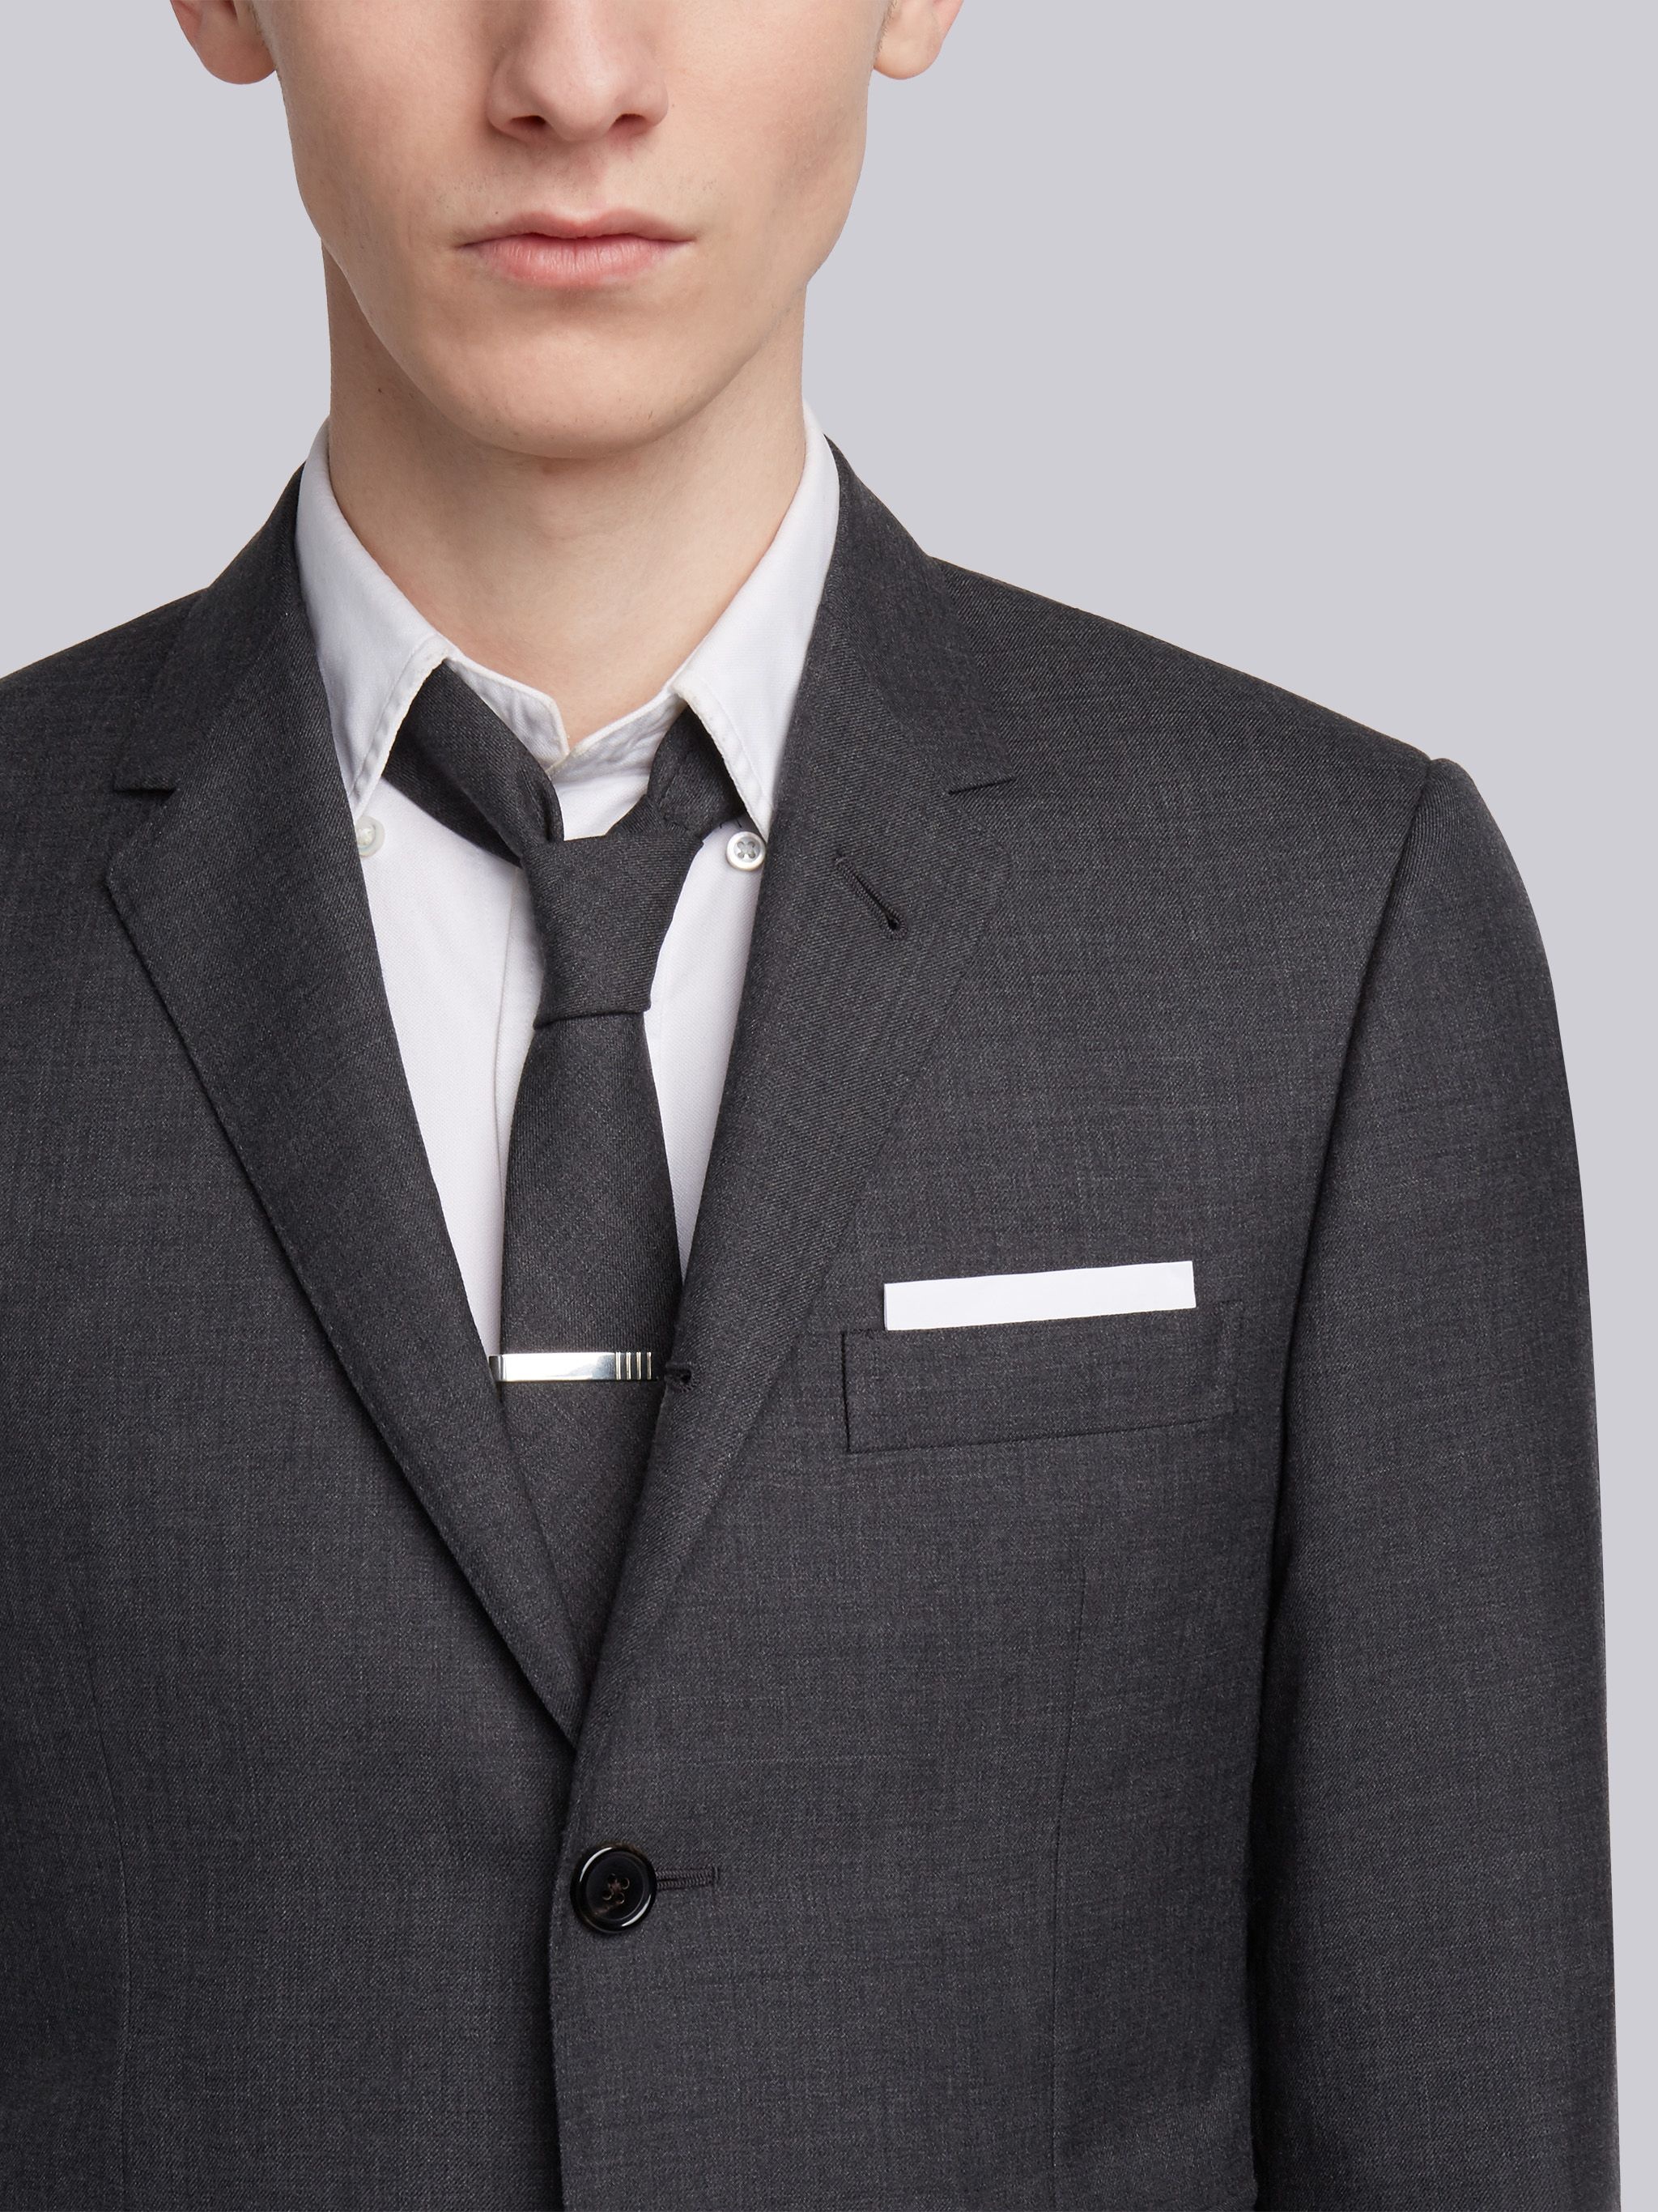 Dark Grey Super 120's Wool Twill Classic Suit and Tie - 5